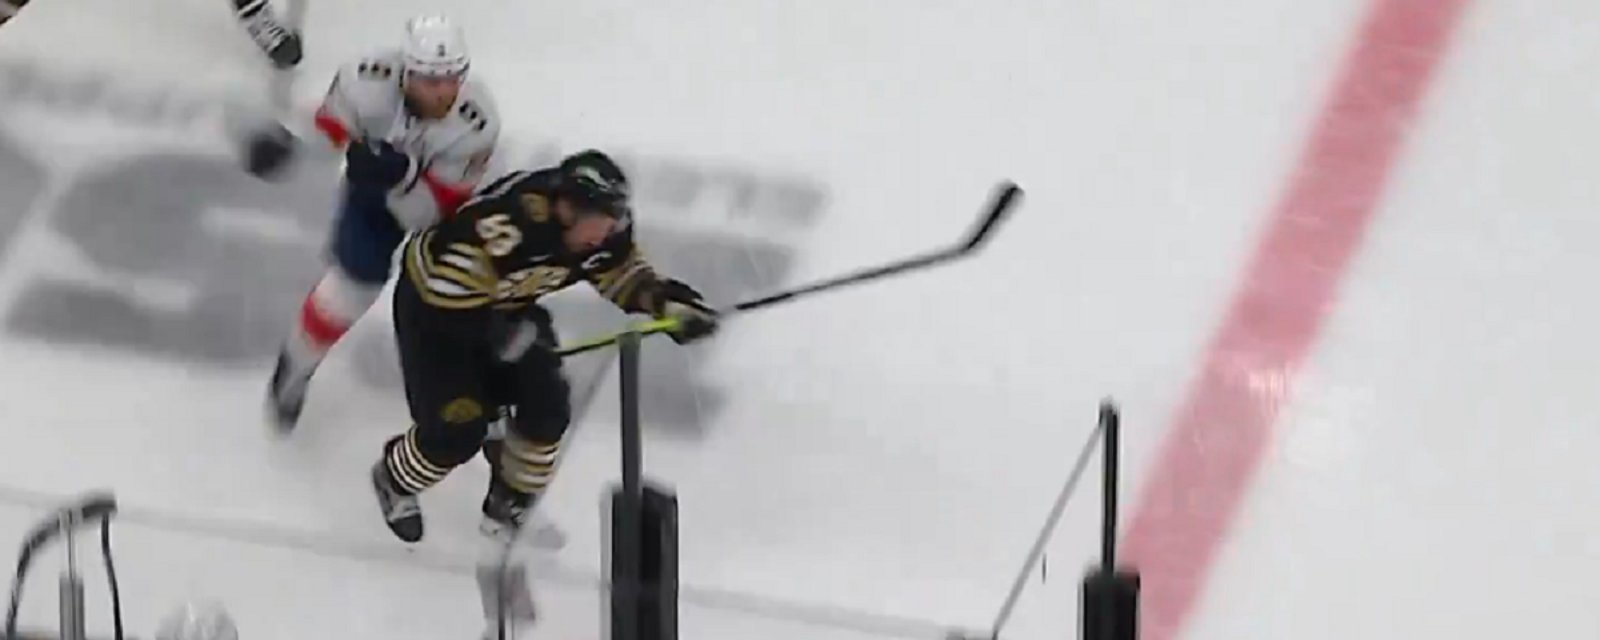 New video angle confirms Bennett sucker-punch on Marchand.